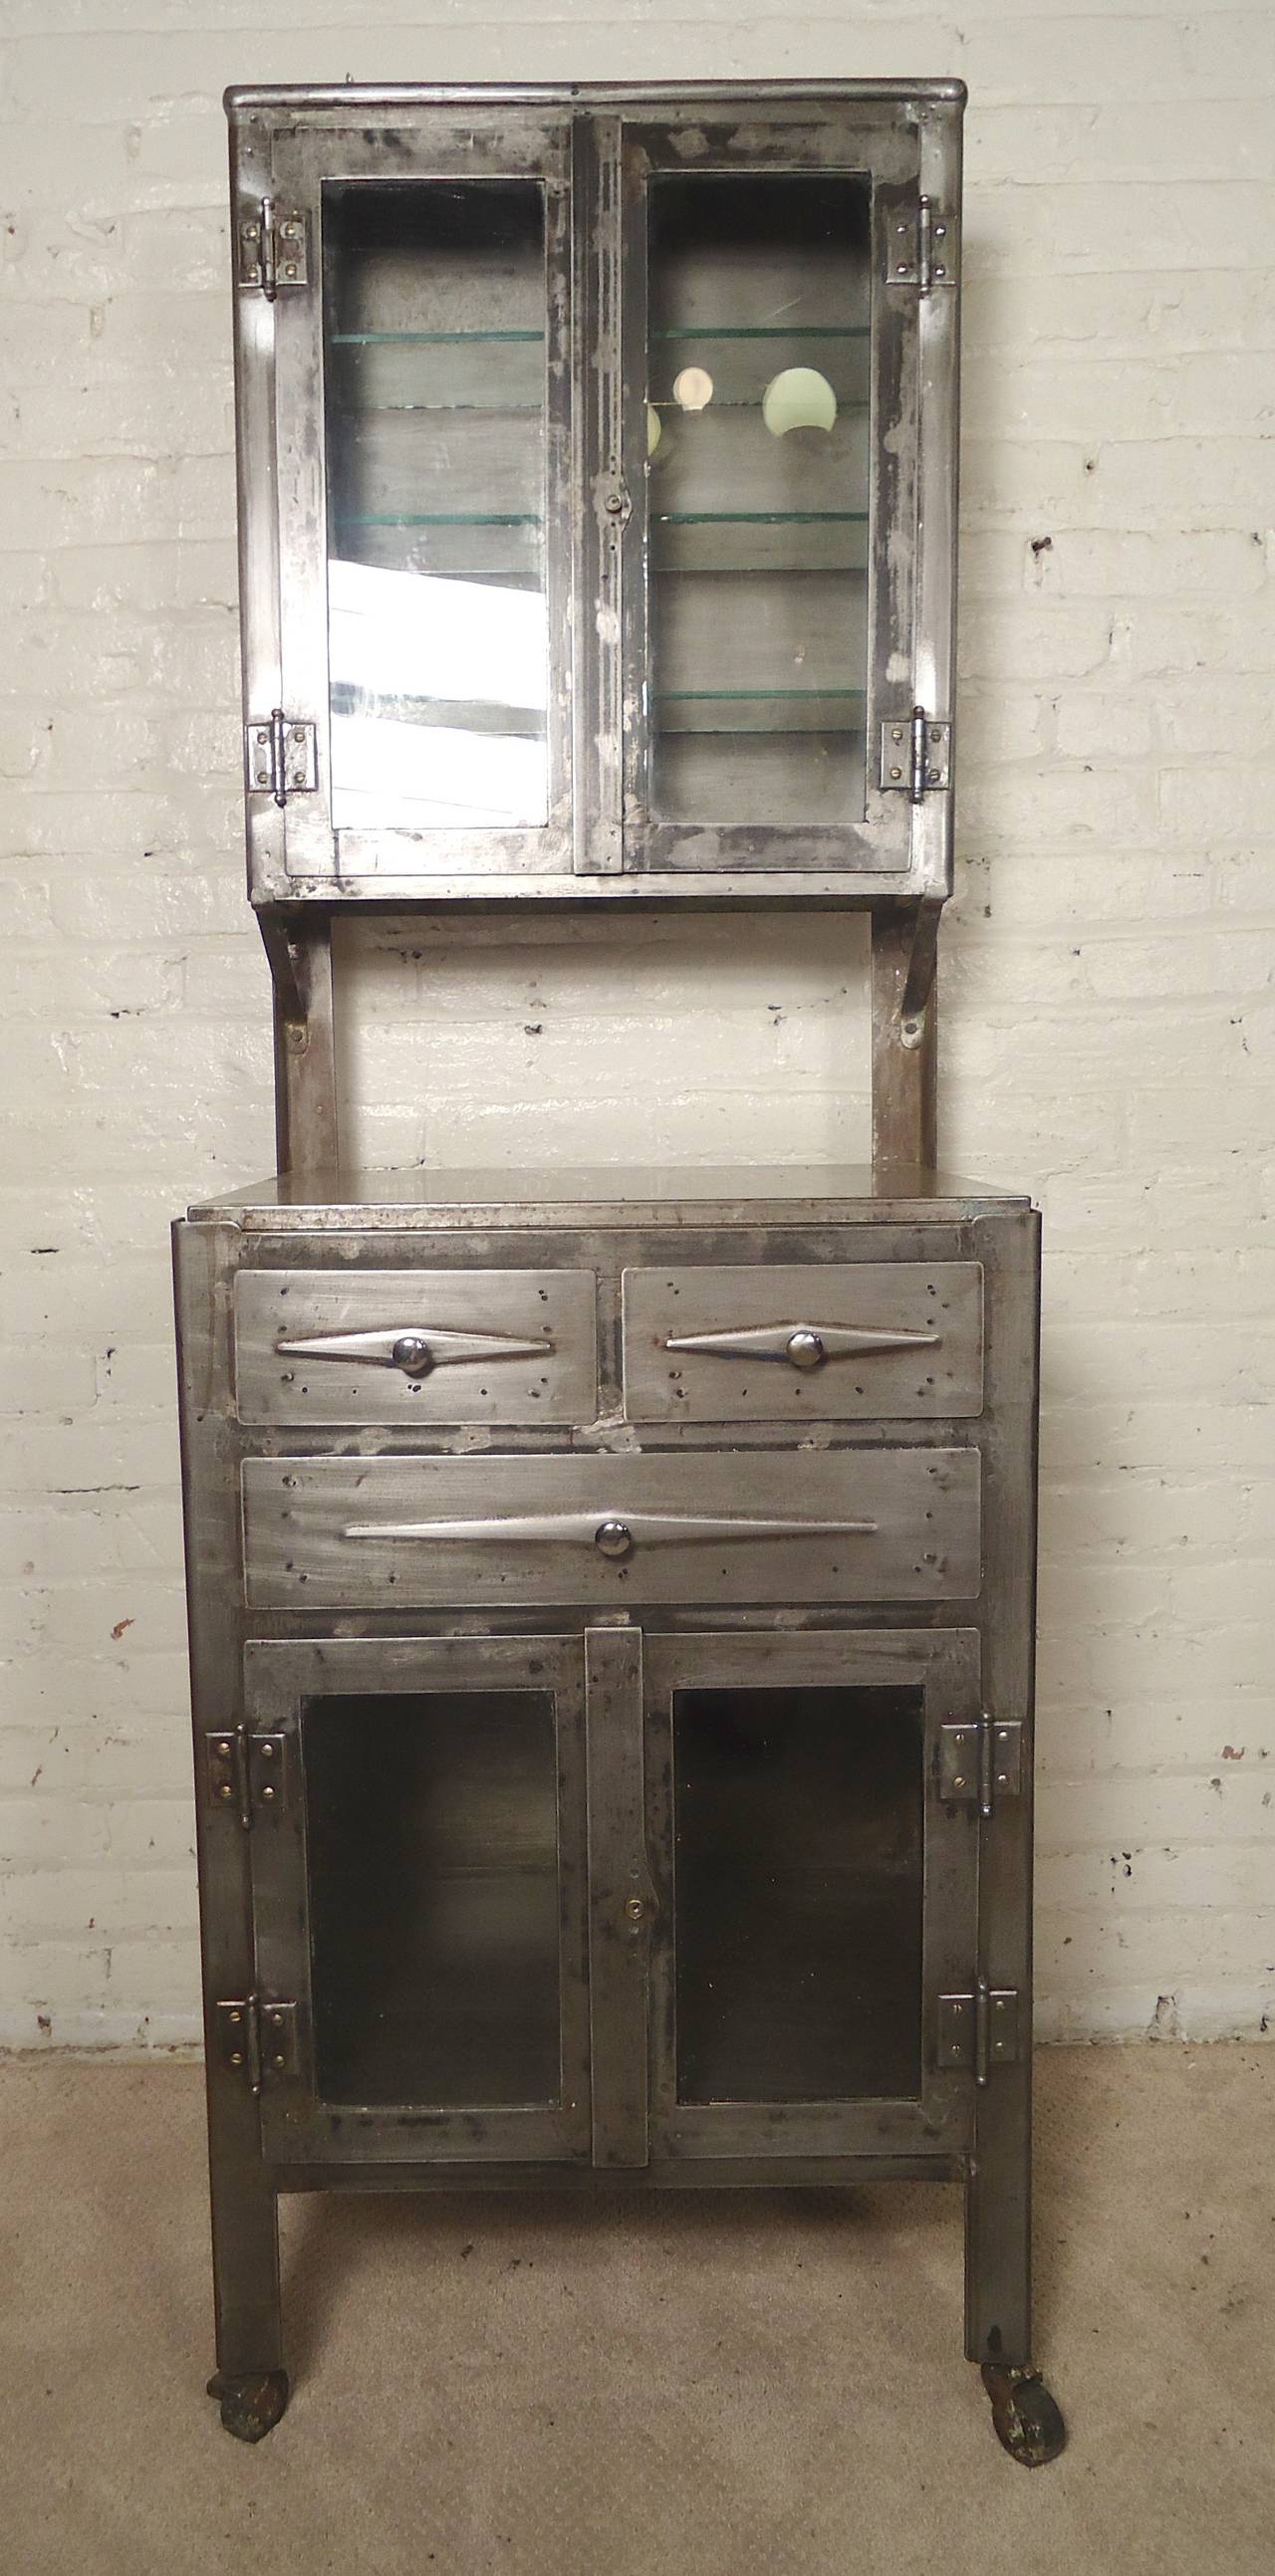 Tall display cabinet with top and bottom transparent storage. Completely restored to a bare metal style finish. Removable glass shelves, drawers and bottom cabinet space, set on rolling casters.

(Please confirm item location - NY or NJ - with